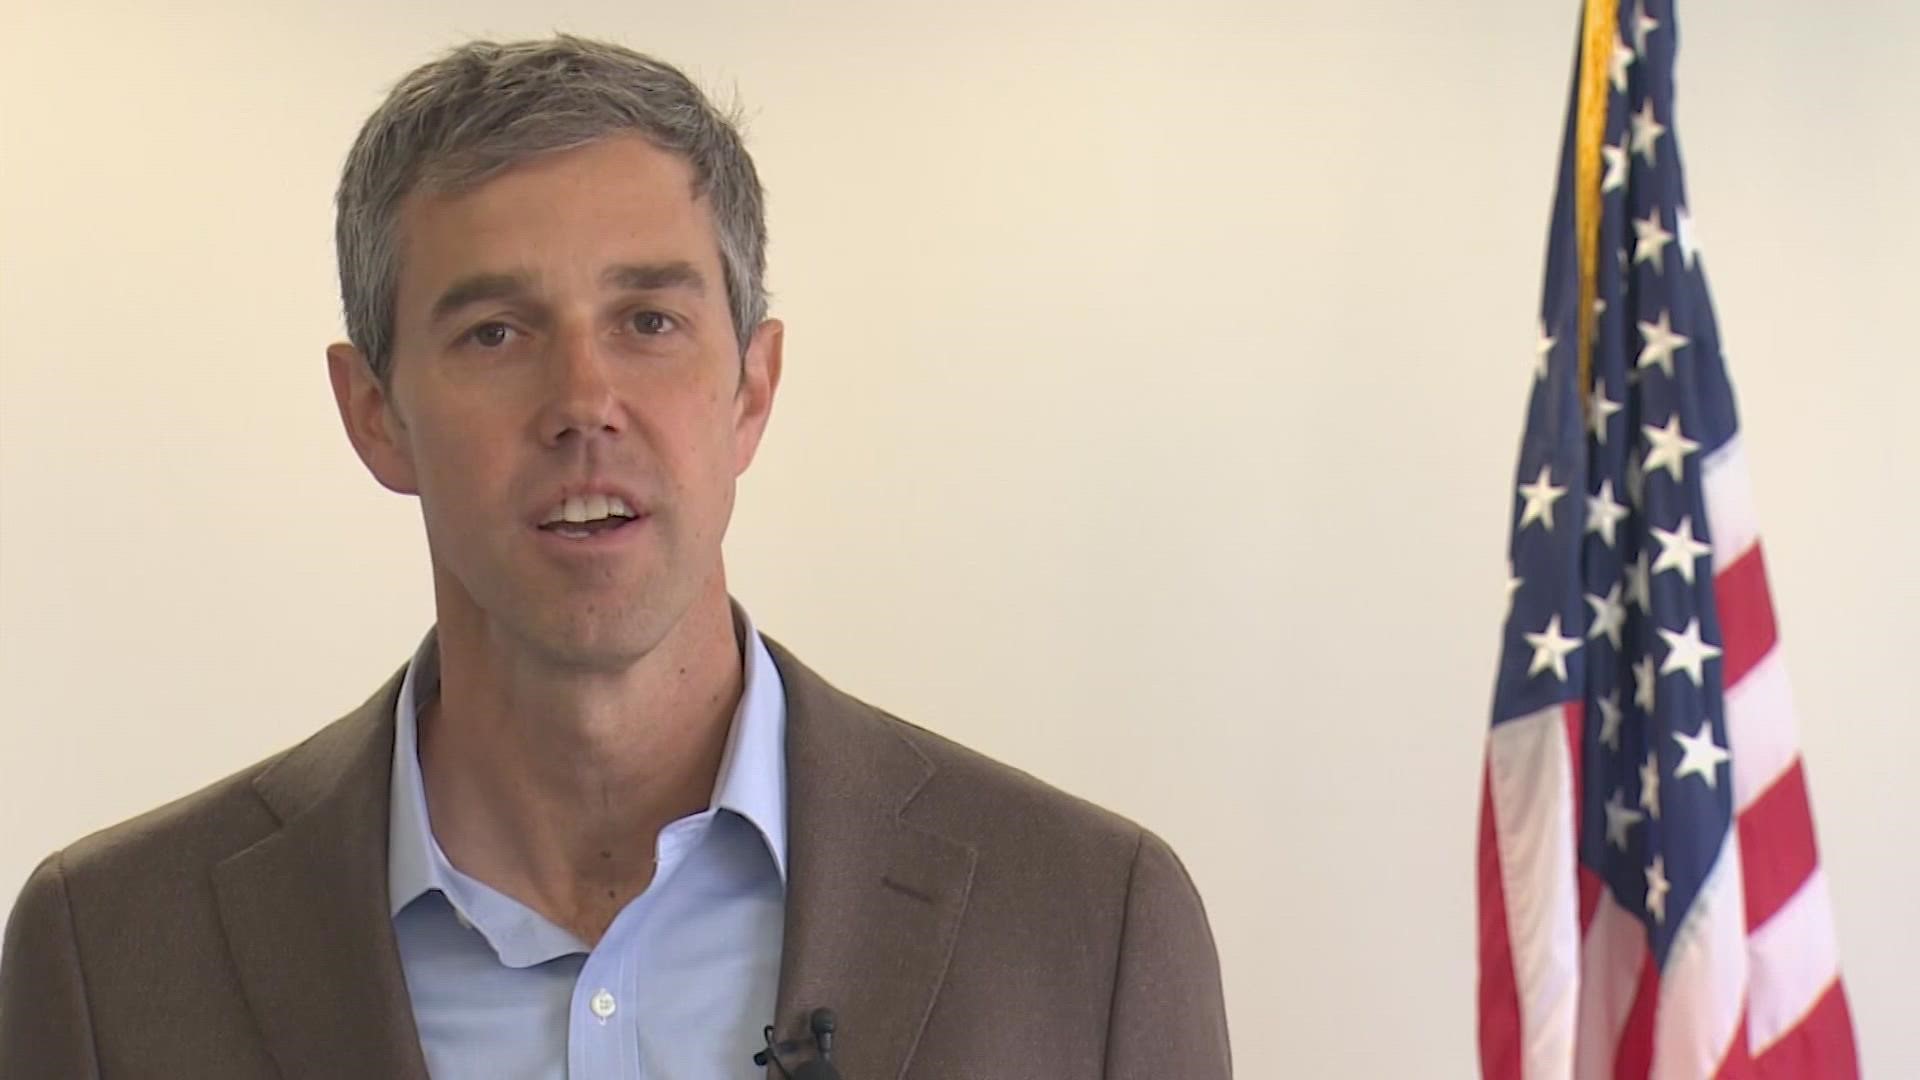 Texas is currently 20,000 nurses short. O'Rourke's proposal calls for adding 7,500 nurses per year through a state-sponsored apprenticeship program.